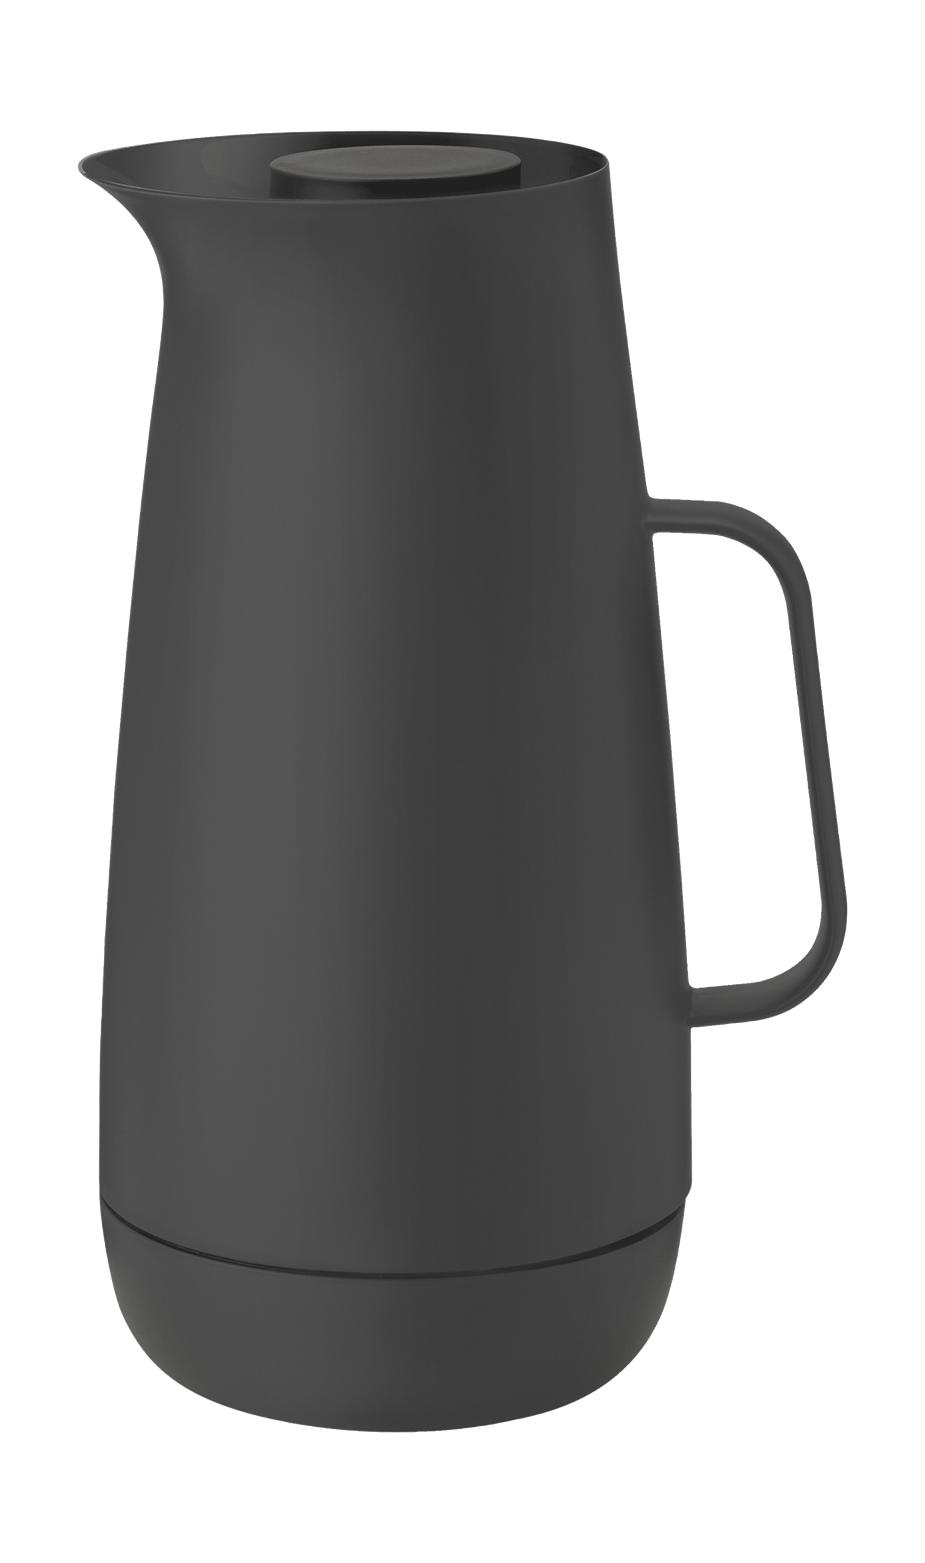 Stelton Norman Foster Thermo Hande 1 L, Anthracite